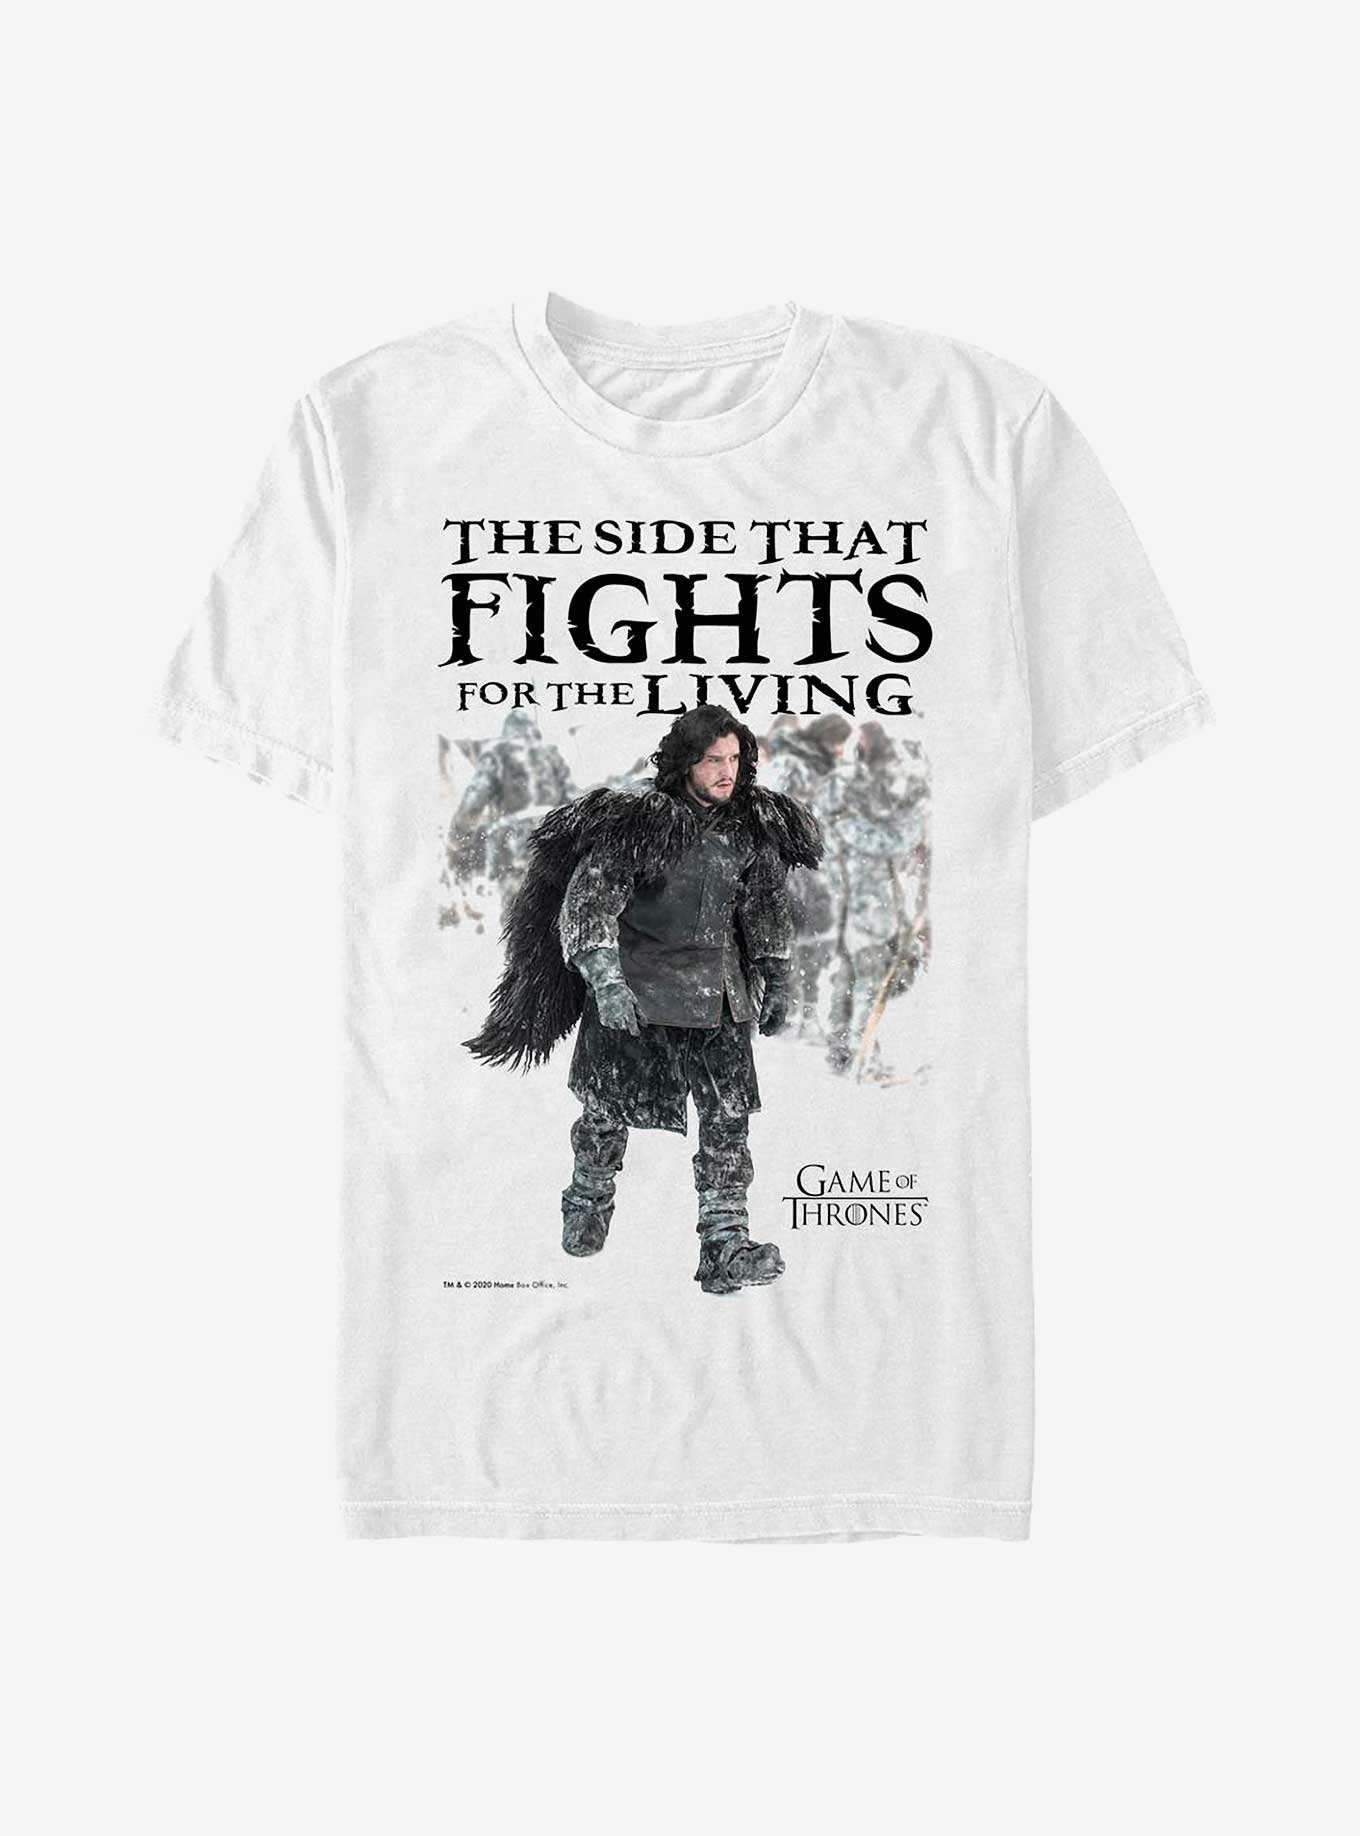 OFFICIAL Game Of Thrones T-Shirts & Merchandise | Hot Topic